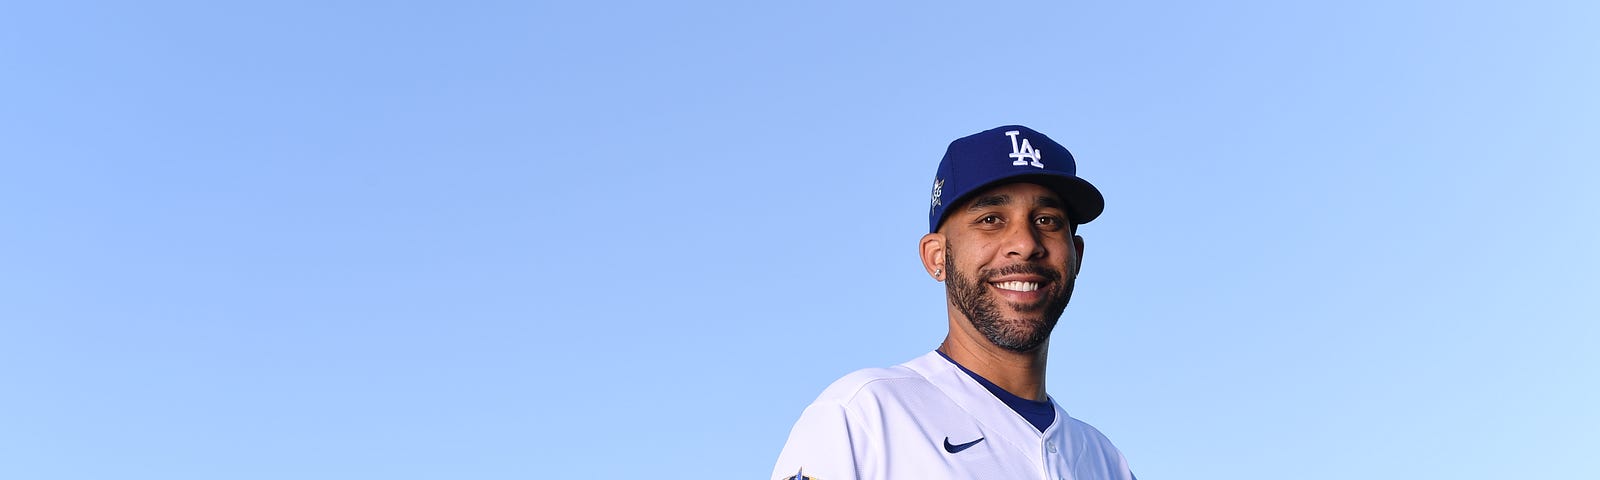 Introducing the 2020 Dodgers Yearbook, by Rowan Kavner